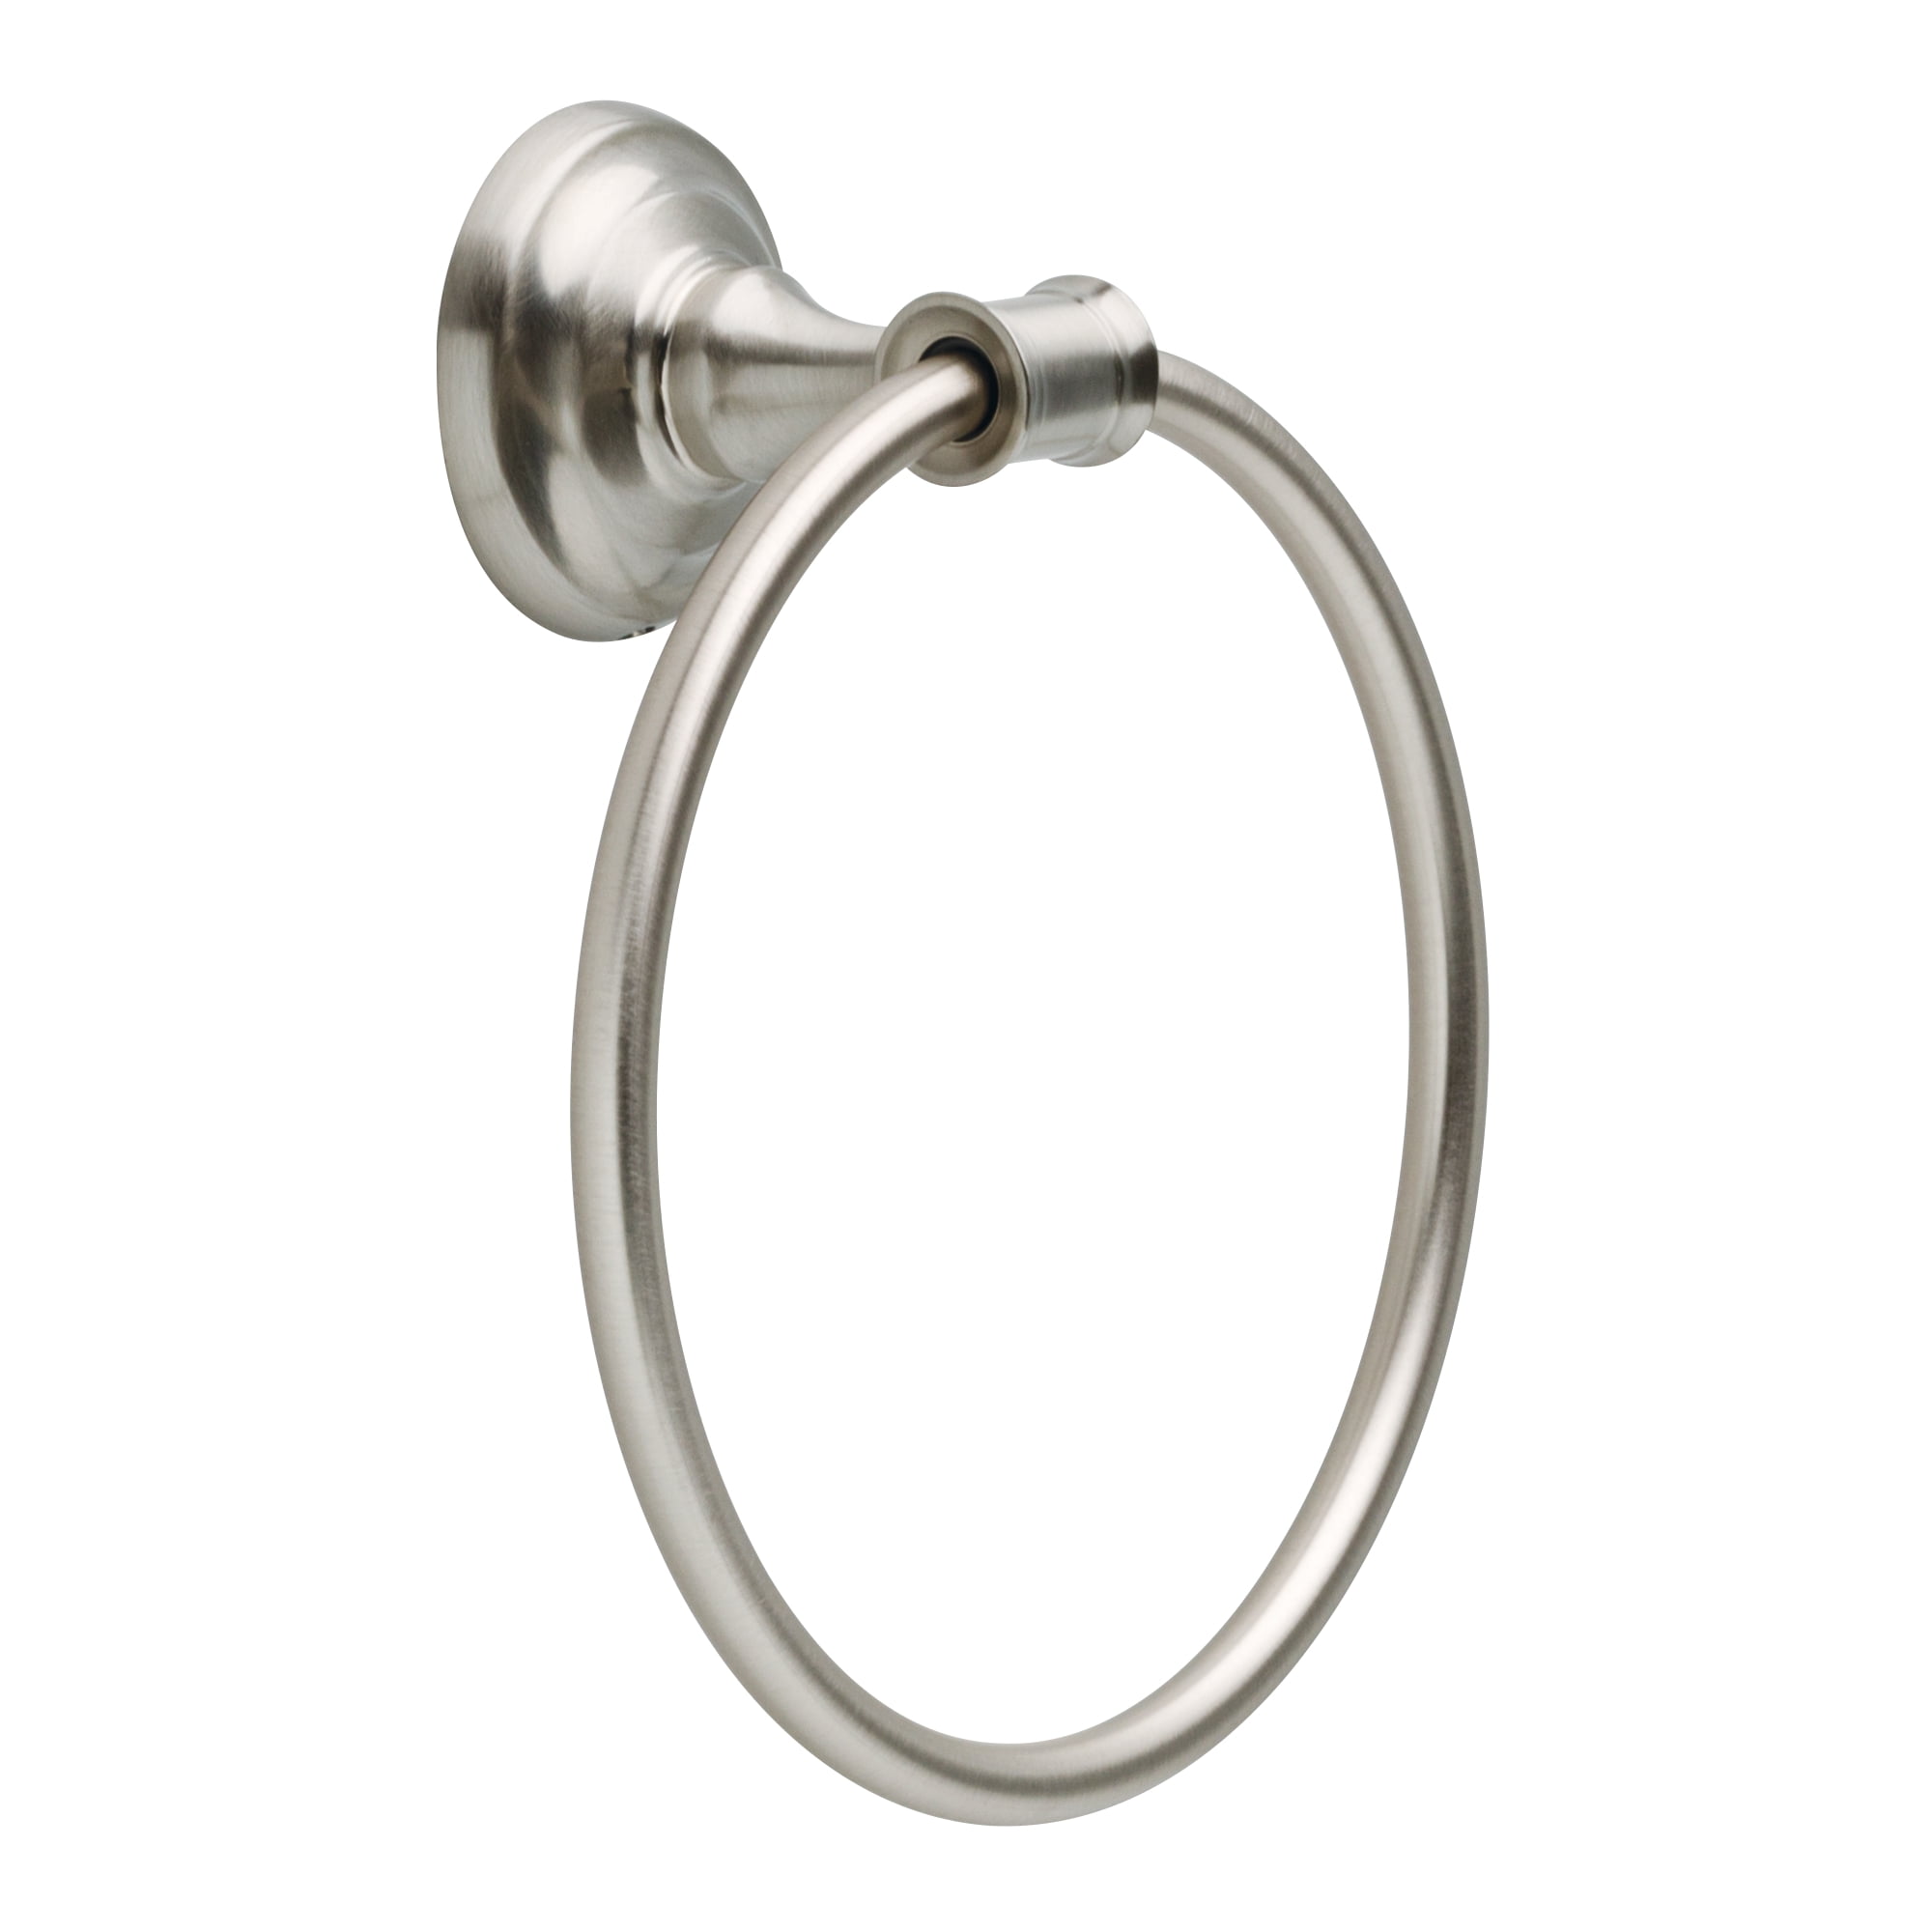 *SATIN NICKLE HAND TOWEL RING WITH HARDWARE 95860-NI ITC FREE SHIPPING 